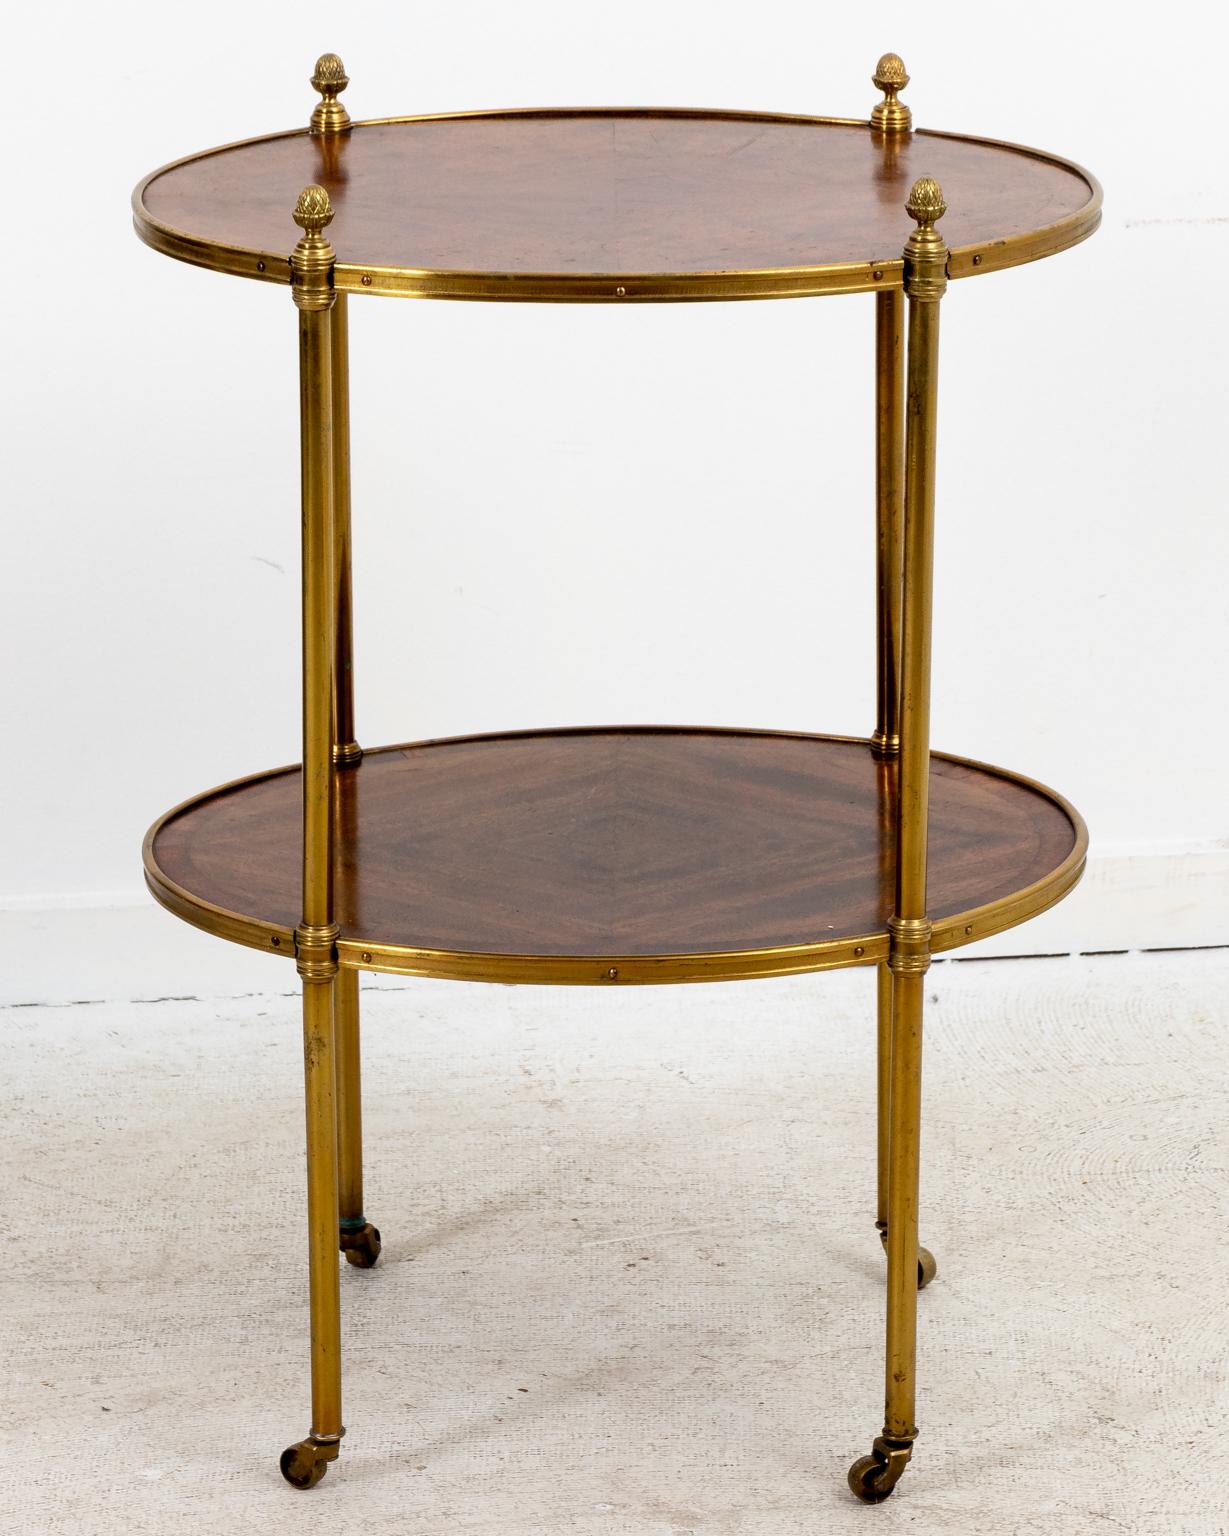 Regency Antique Oval Fruitwood and Brass Two Tiered Side Table